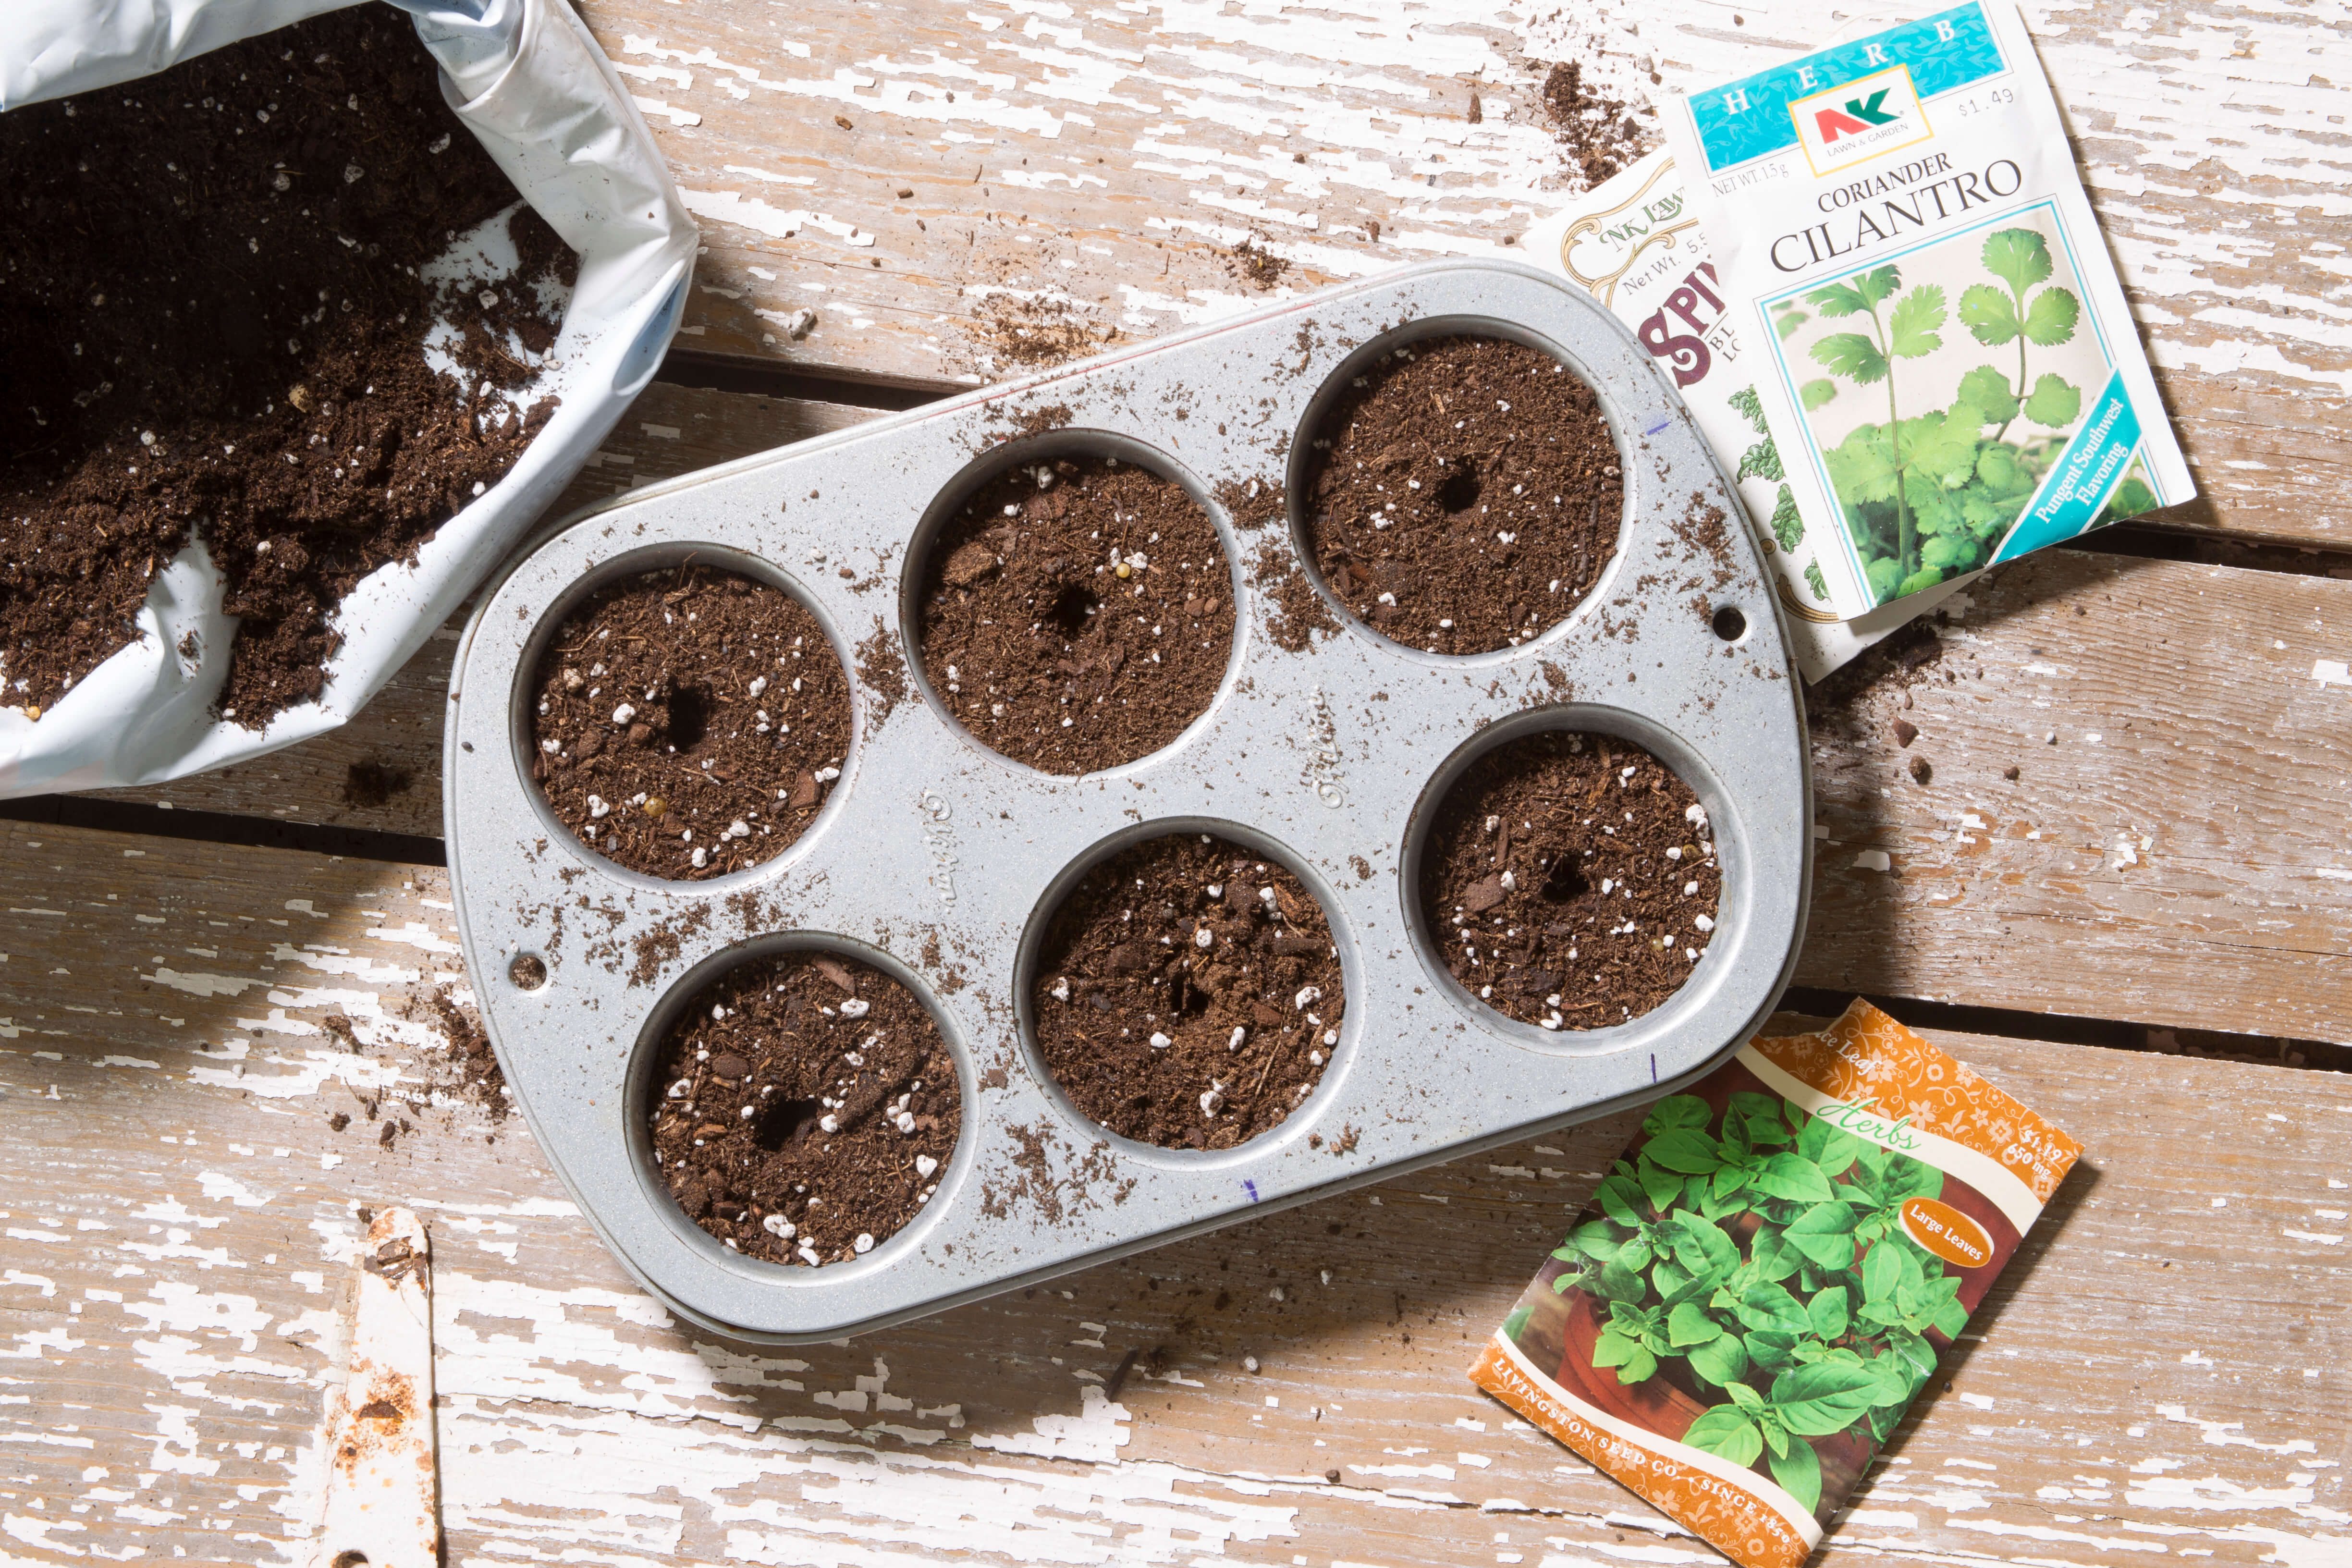 Plant Starting Tray or Seed Starting Tray with a Muffin Pan